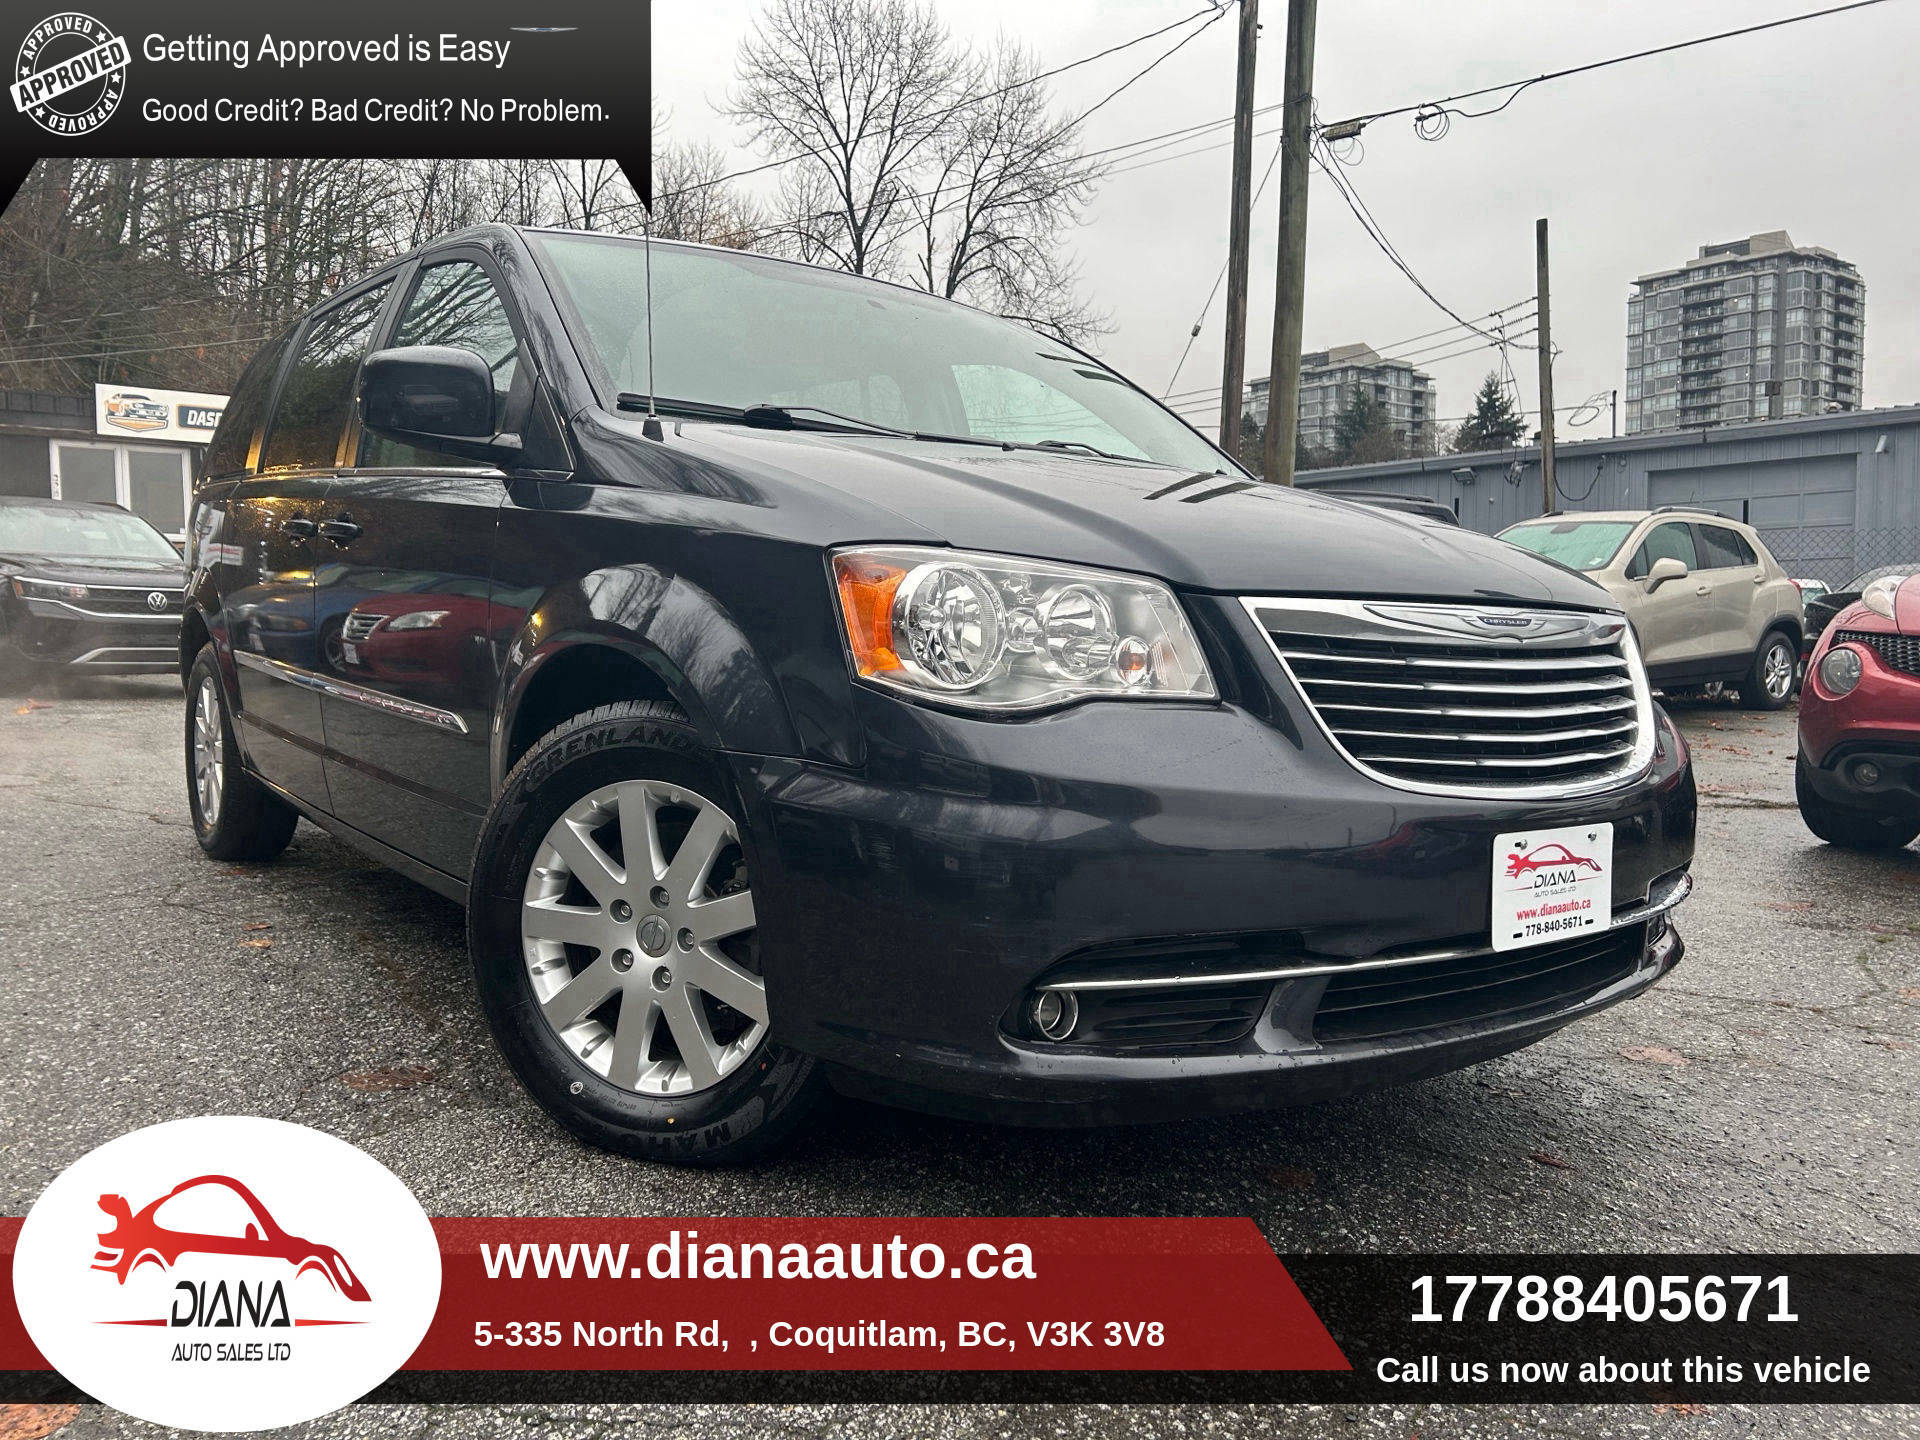 2014 Chrysler Town & Country Touring FWD - New Tires! Family-Friendly!